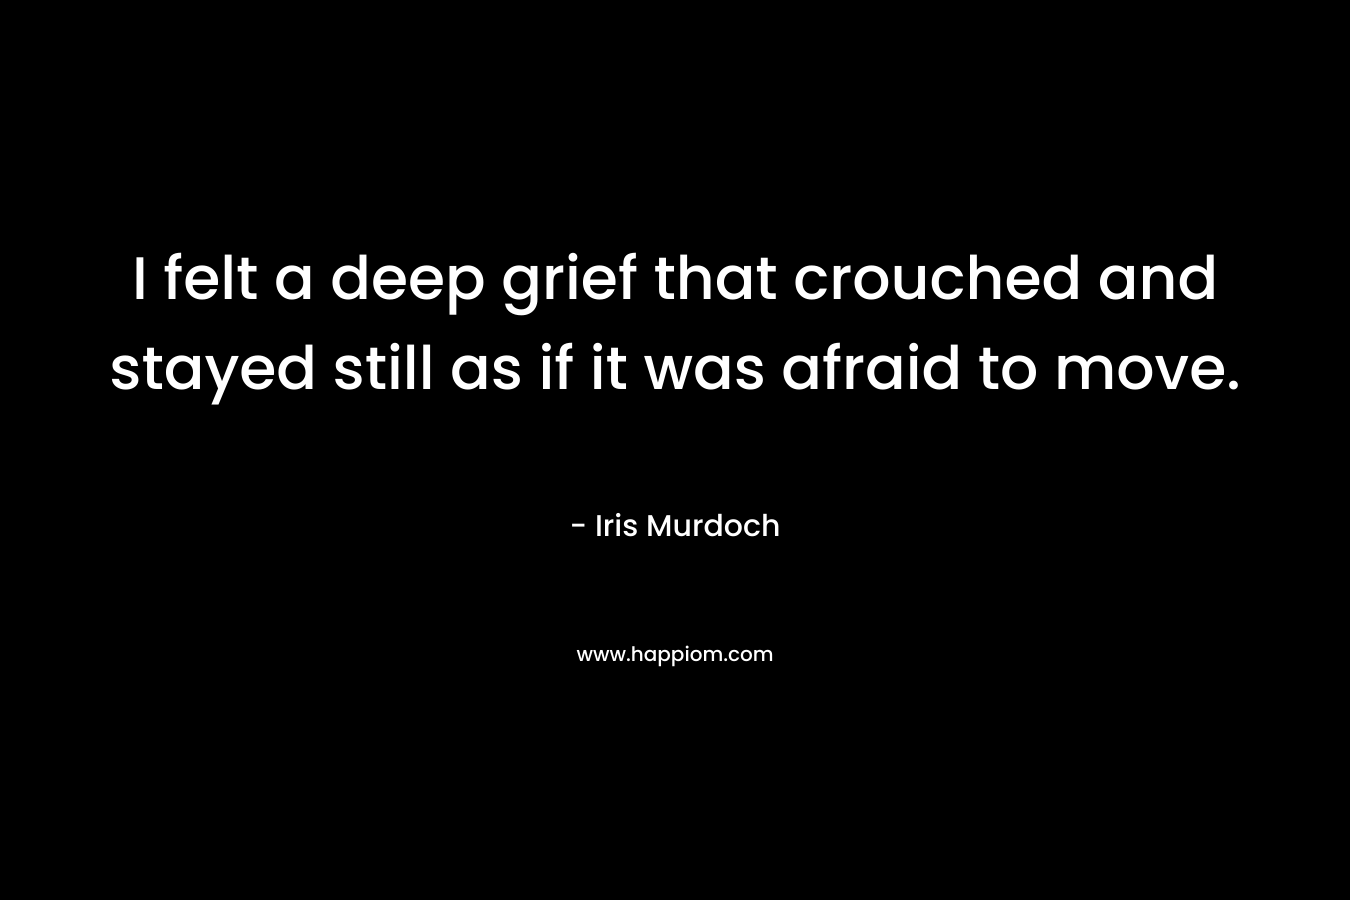 I felt a deep grief that crouched and stayed still as if it was afraid to move. – Iris Murdoch